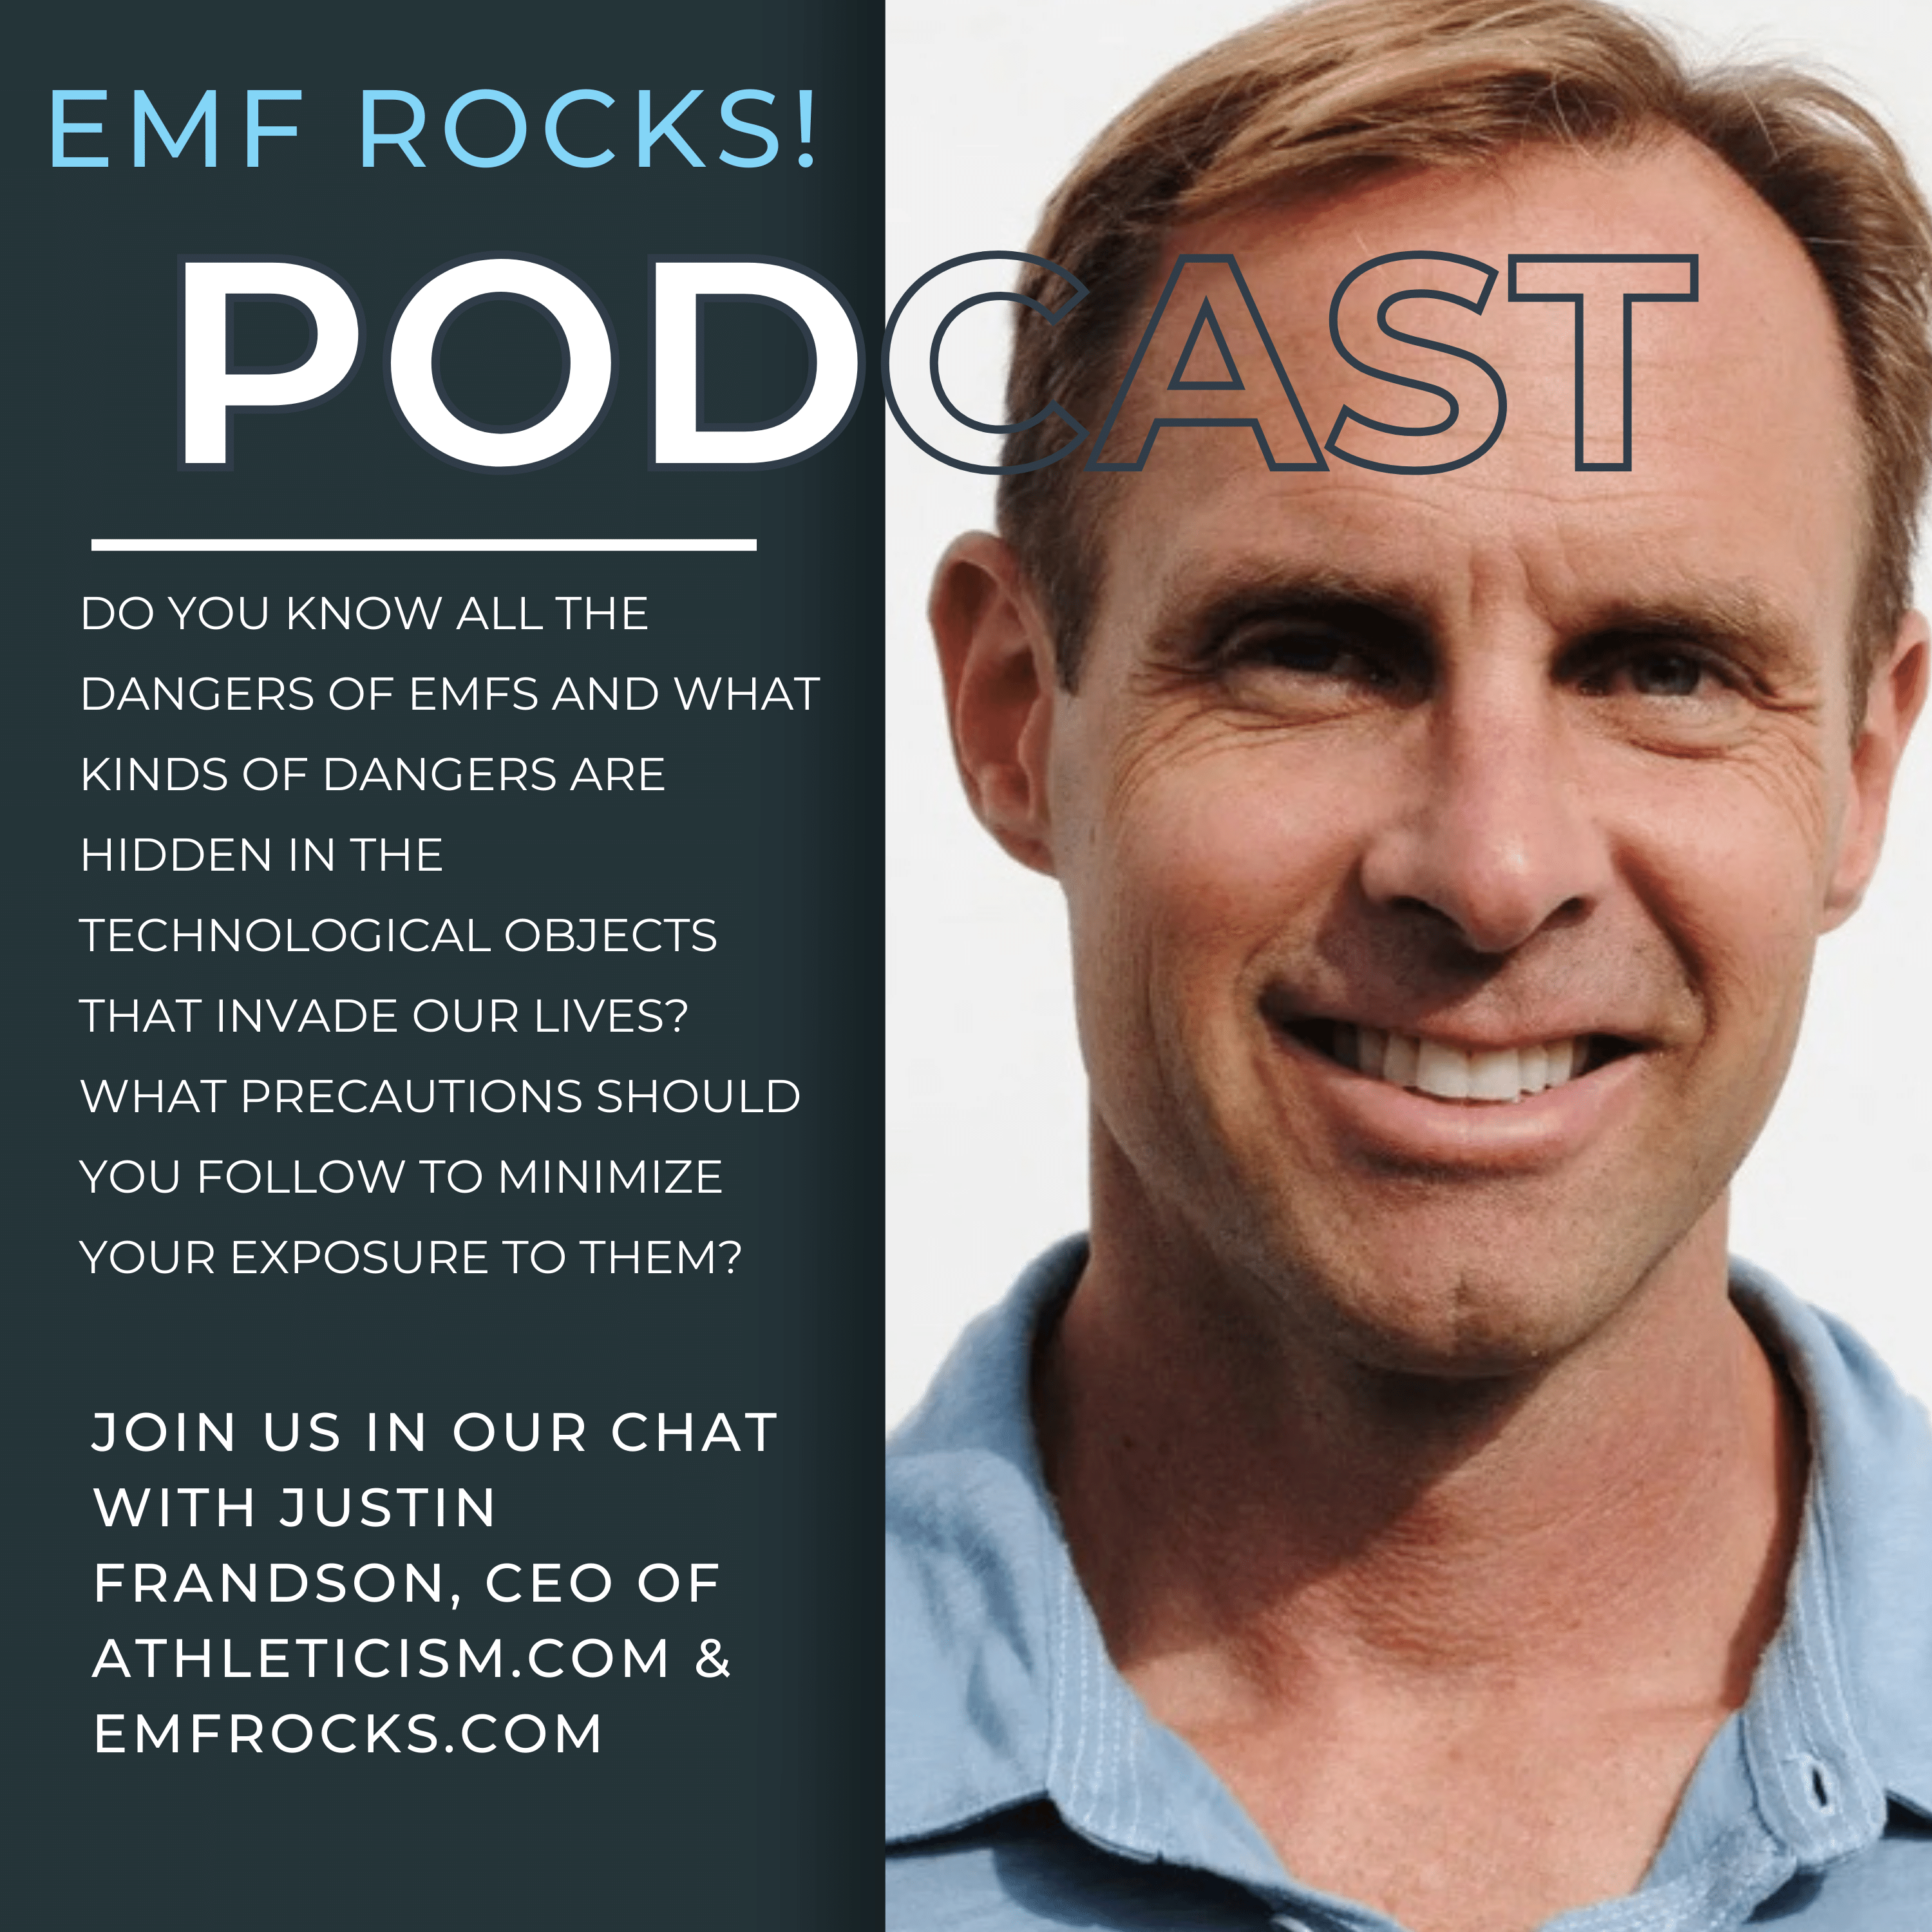 EMF Rocks! The Real Problems Caused by Modern Radiation with Justin Frandson